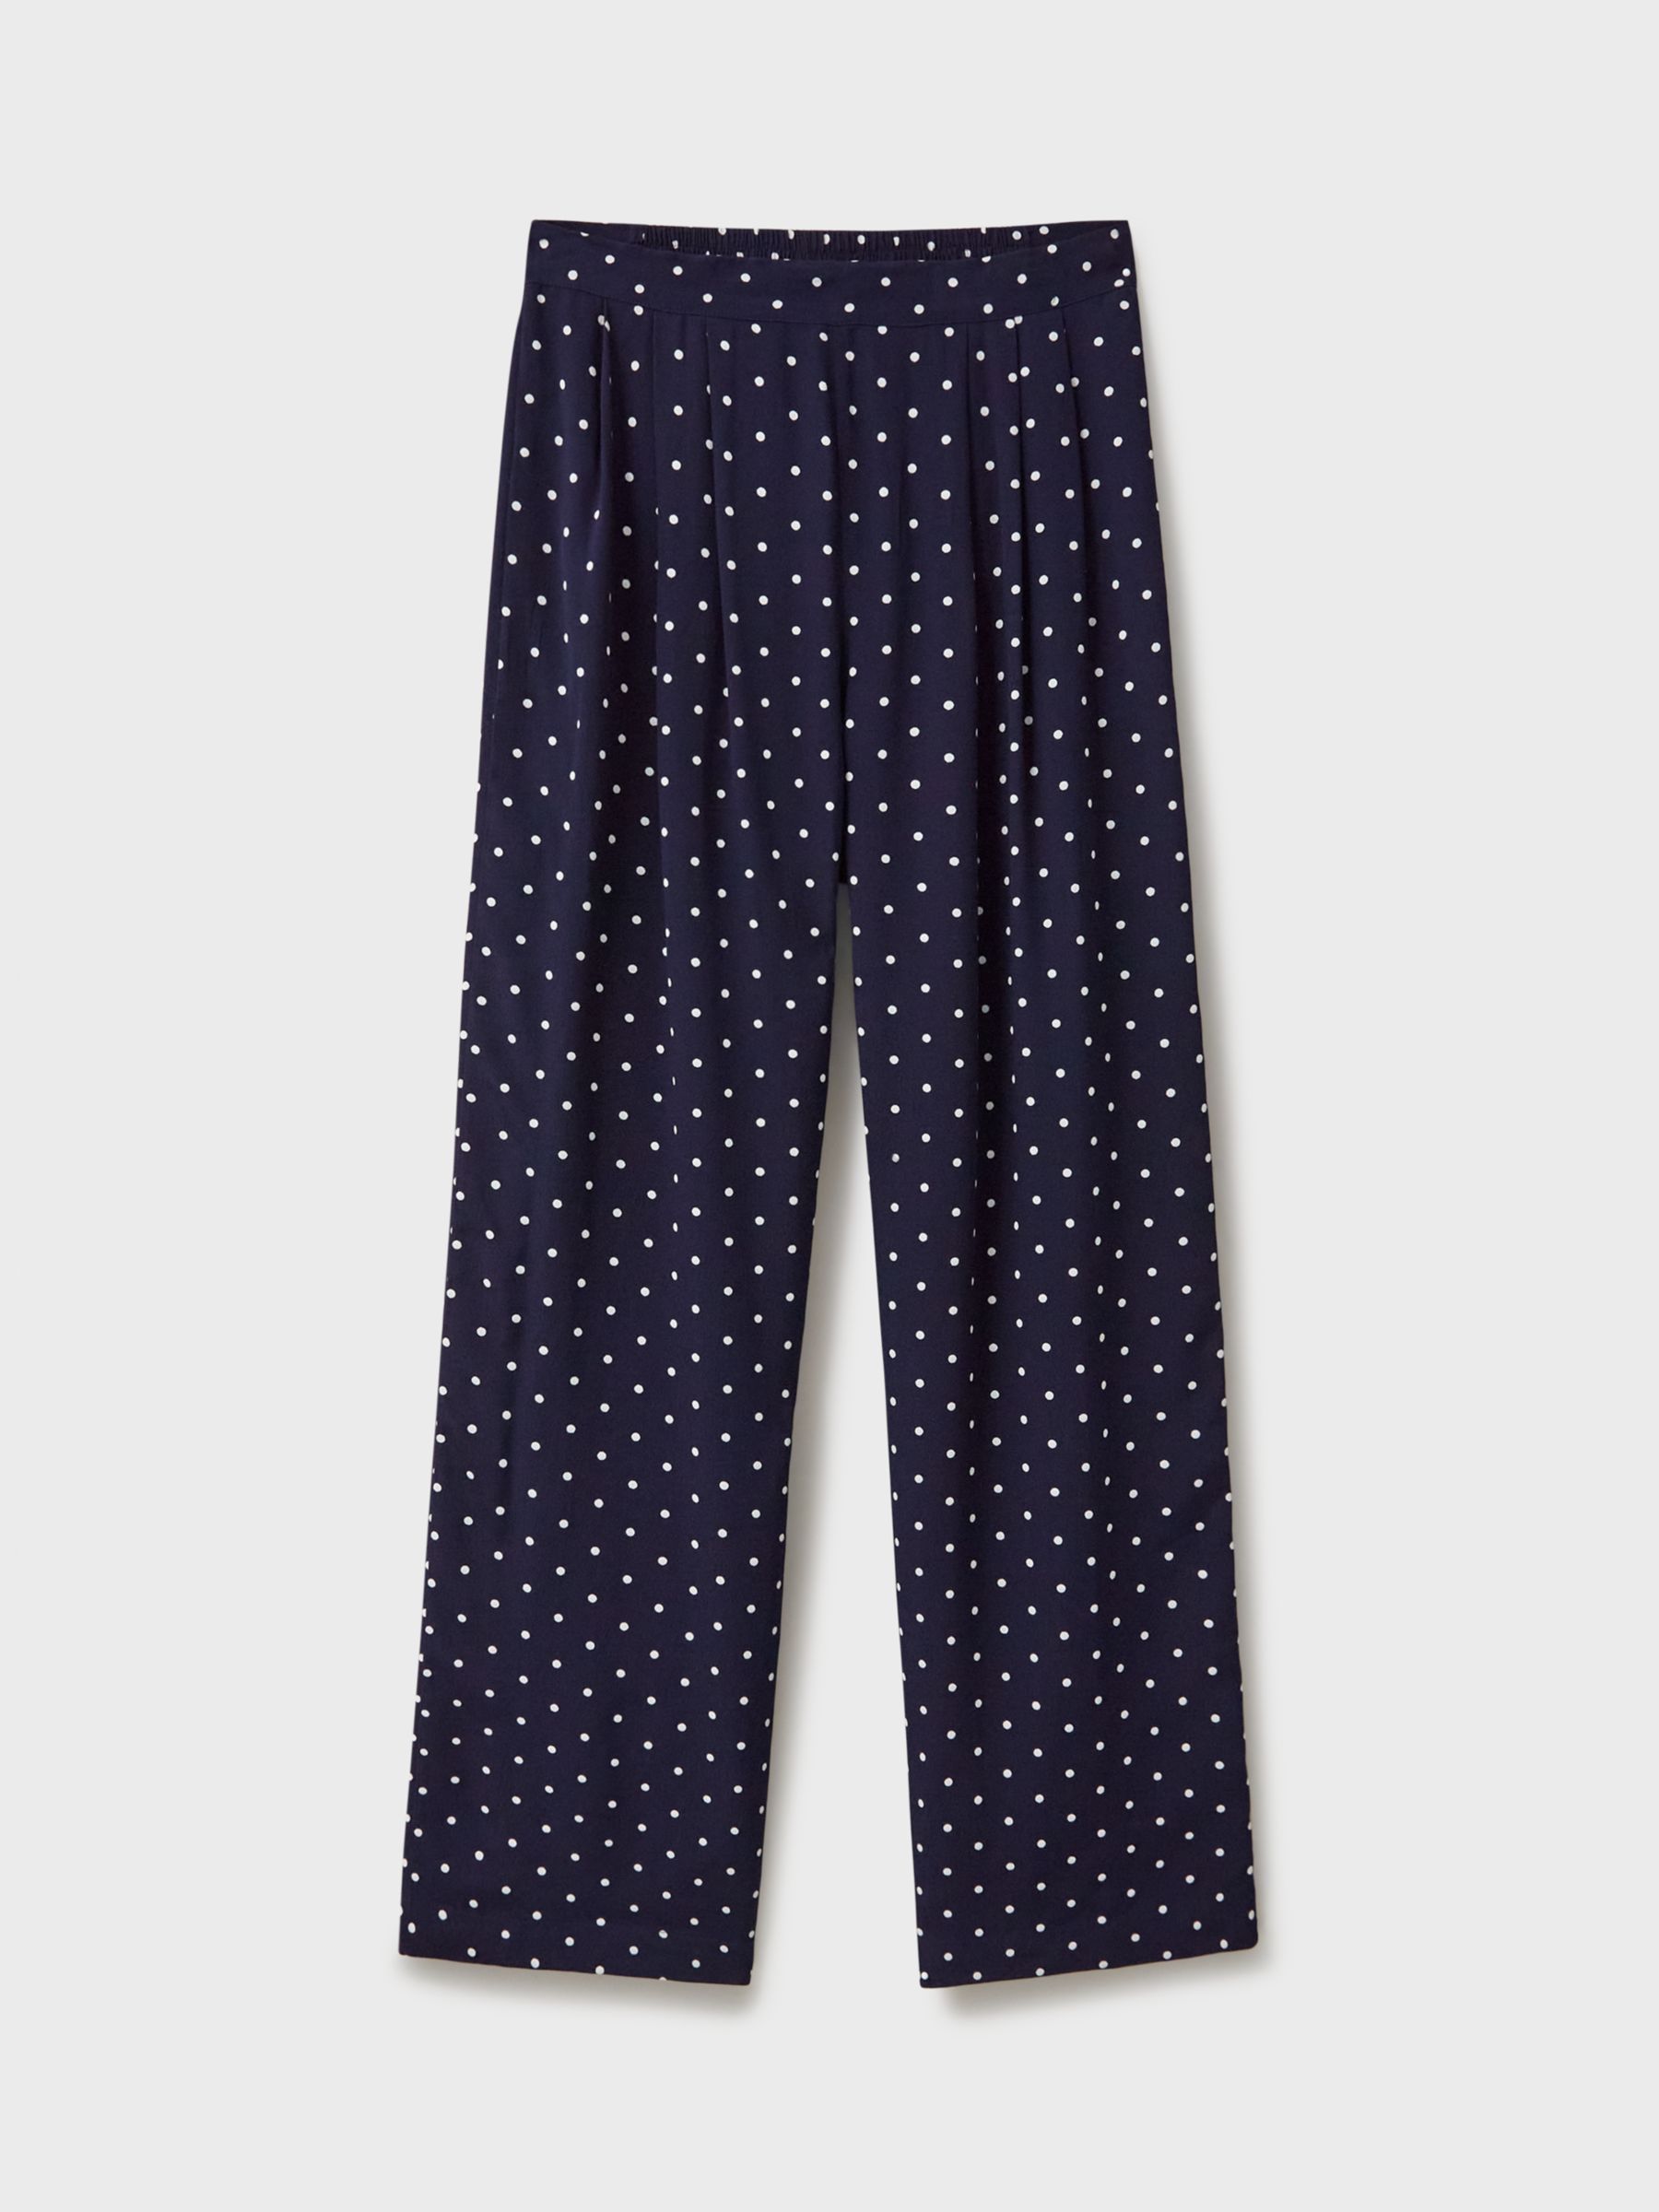 Crew Clothing Dion Wide Leg Polka Dot Trousers, Navy/White, 6